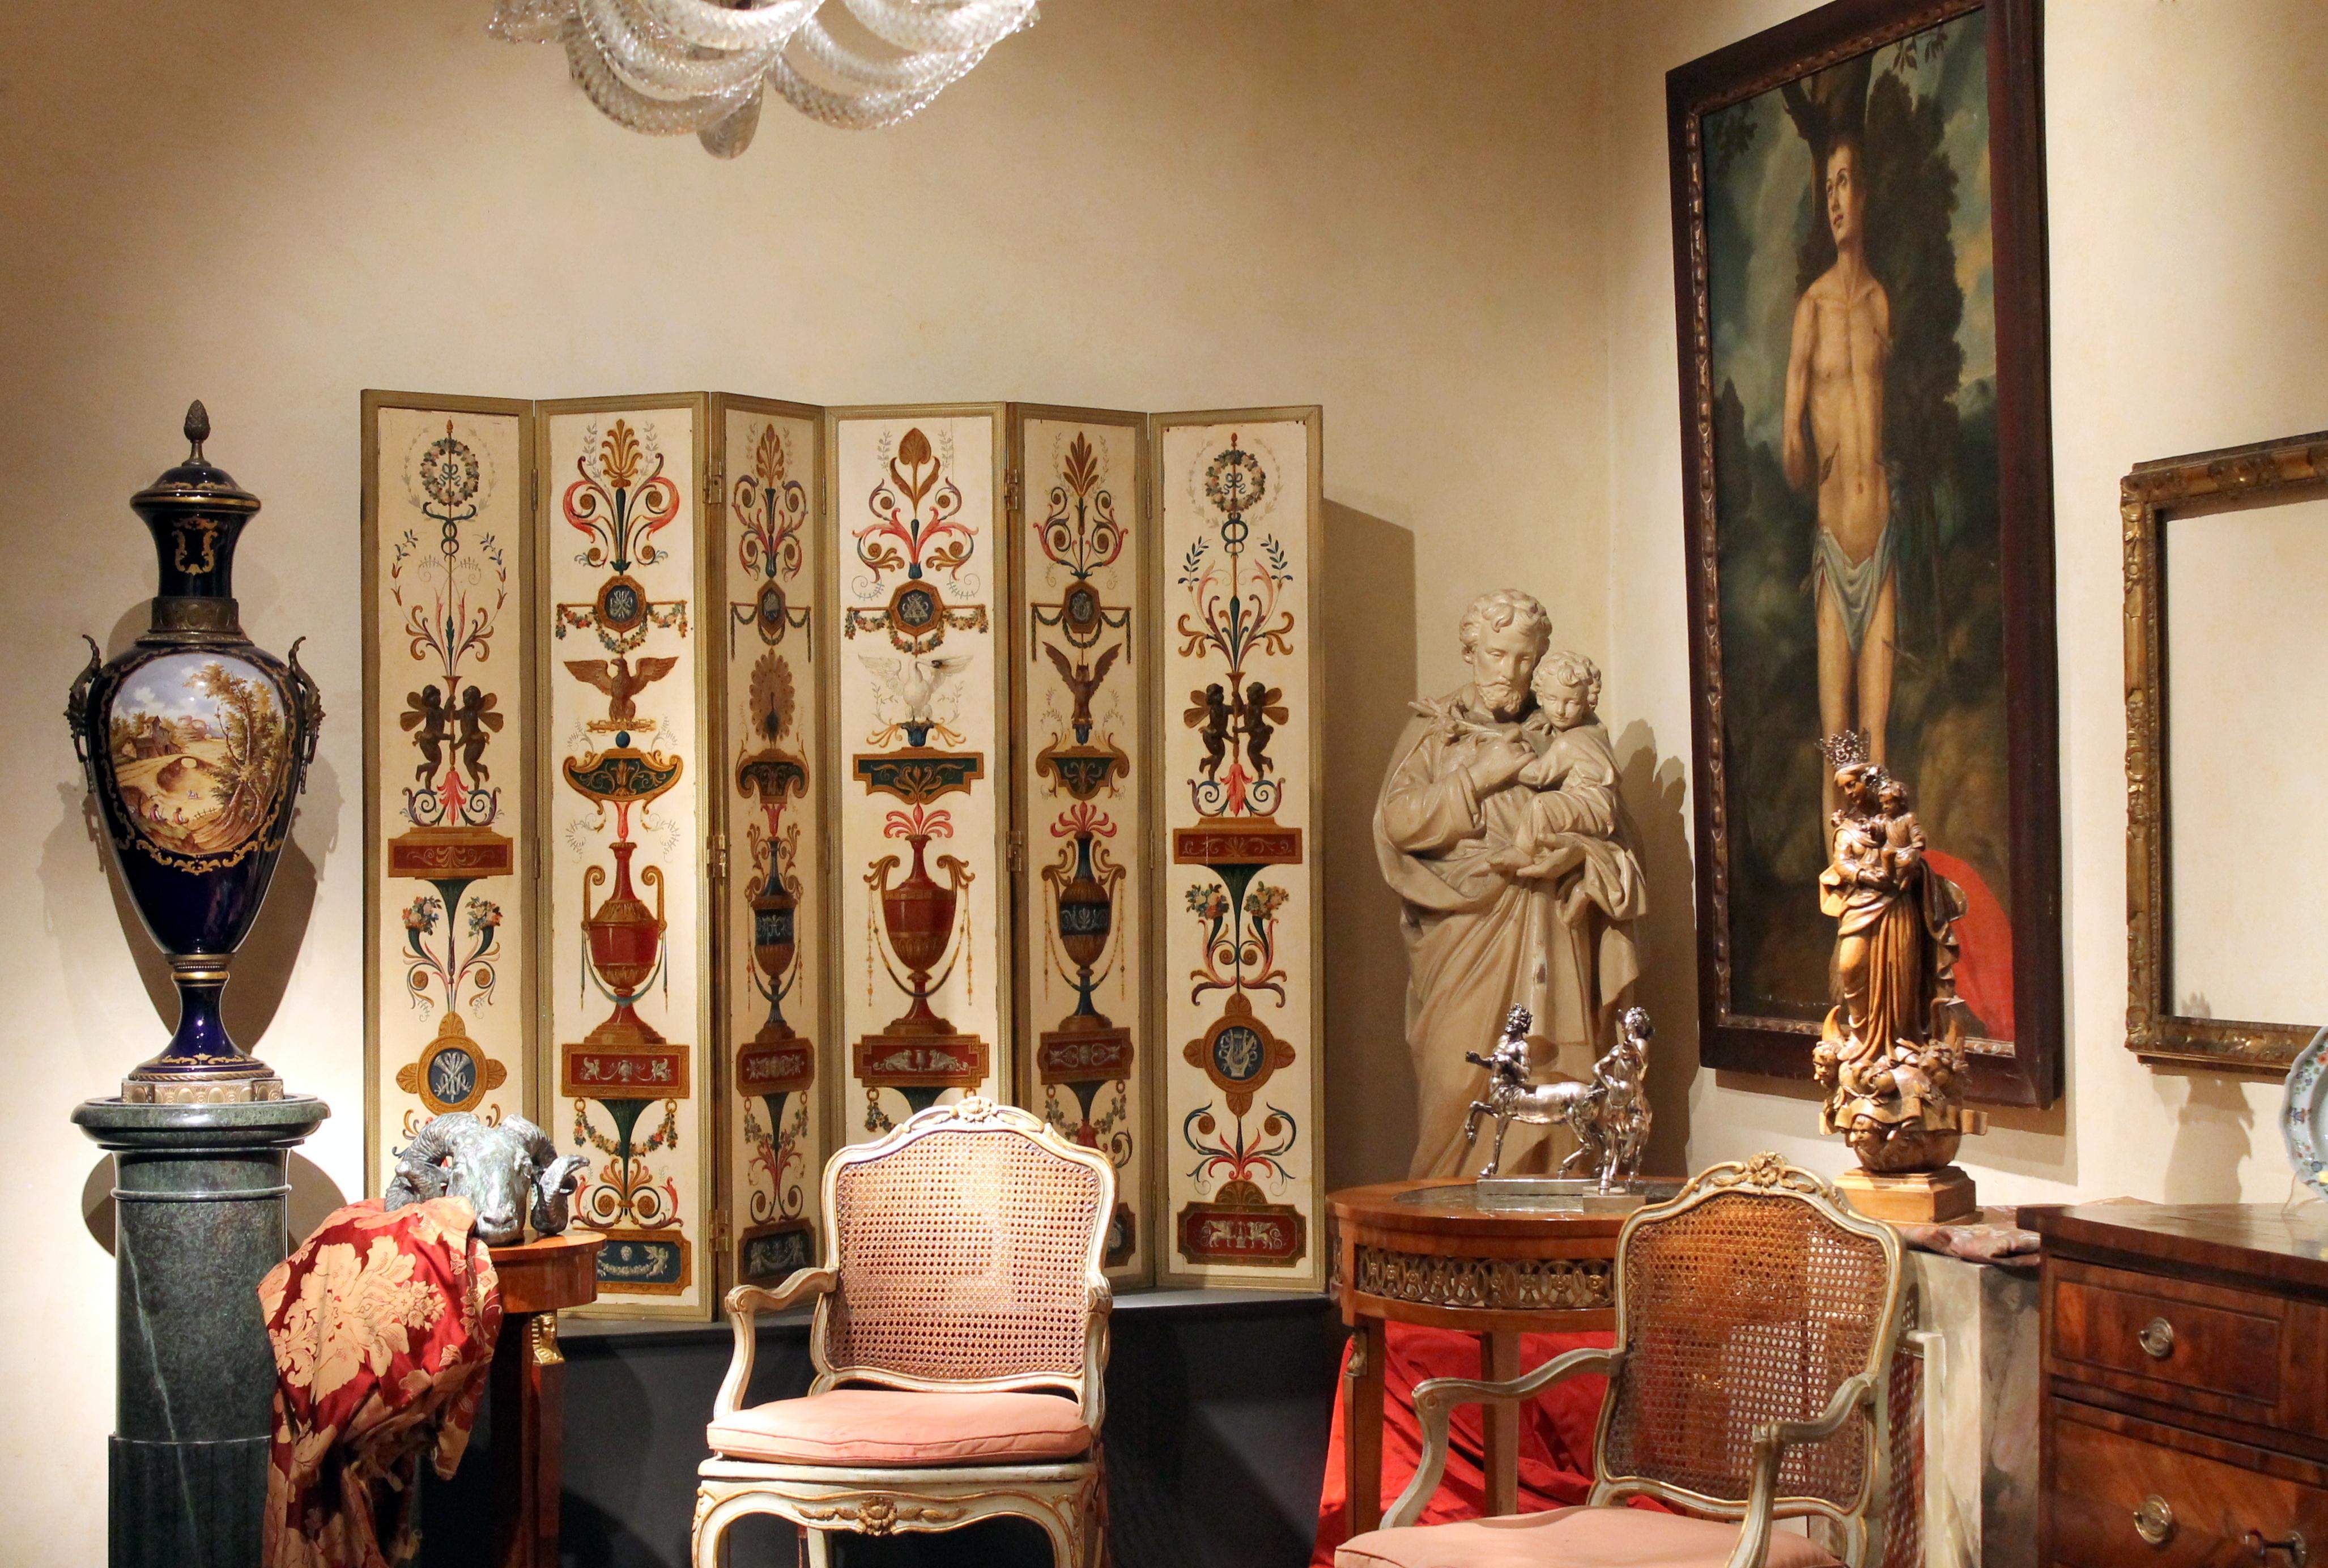 This one-of-a-kind museum quality Italian Empire Period (early 19th Century) room divider folding screen is made up of six rectangular solid wood panels, each richly painted and lacquered with a nice trompe l'oeil effect and housed in gilt bronze